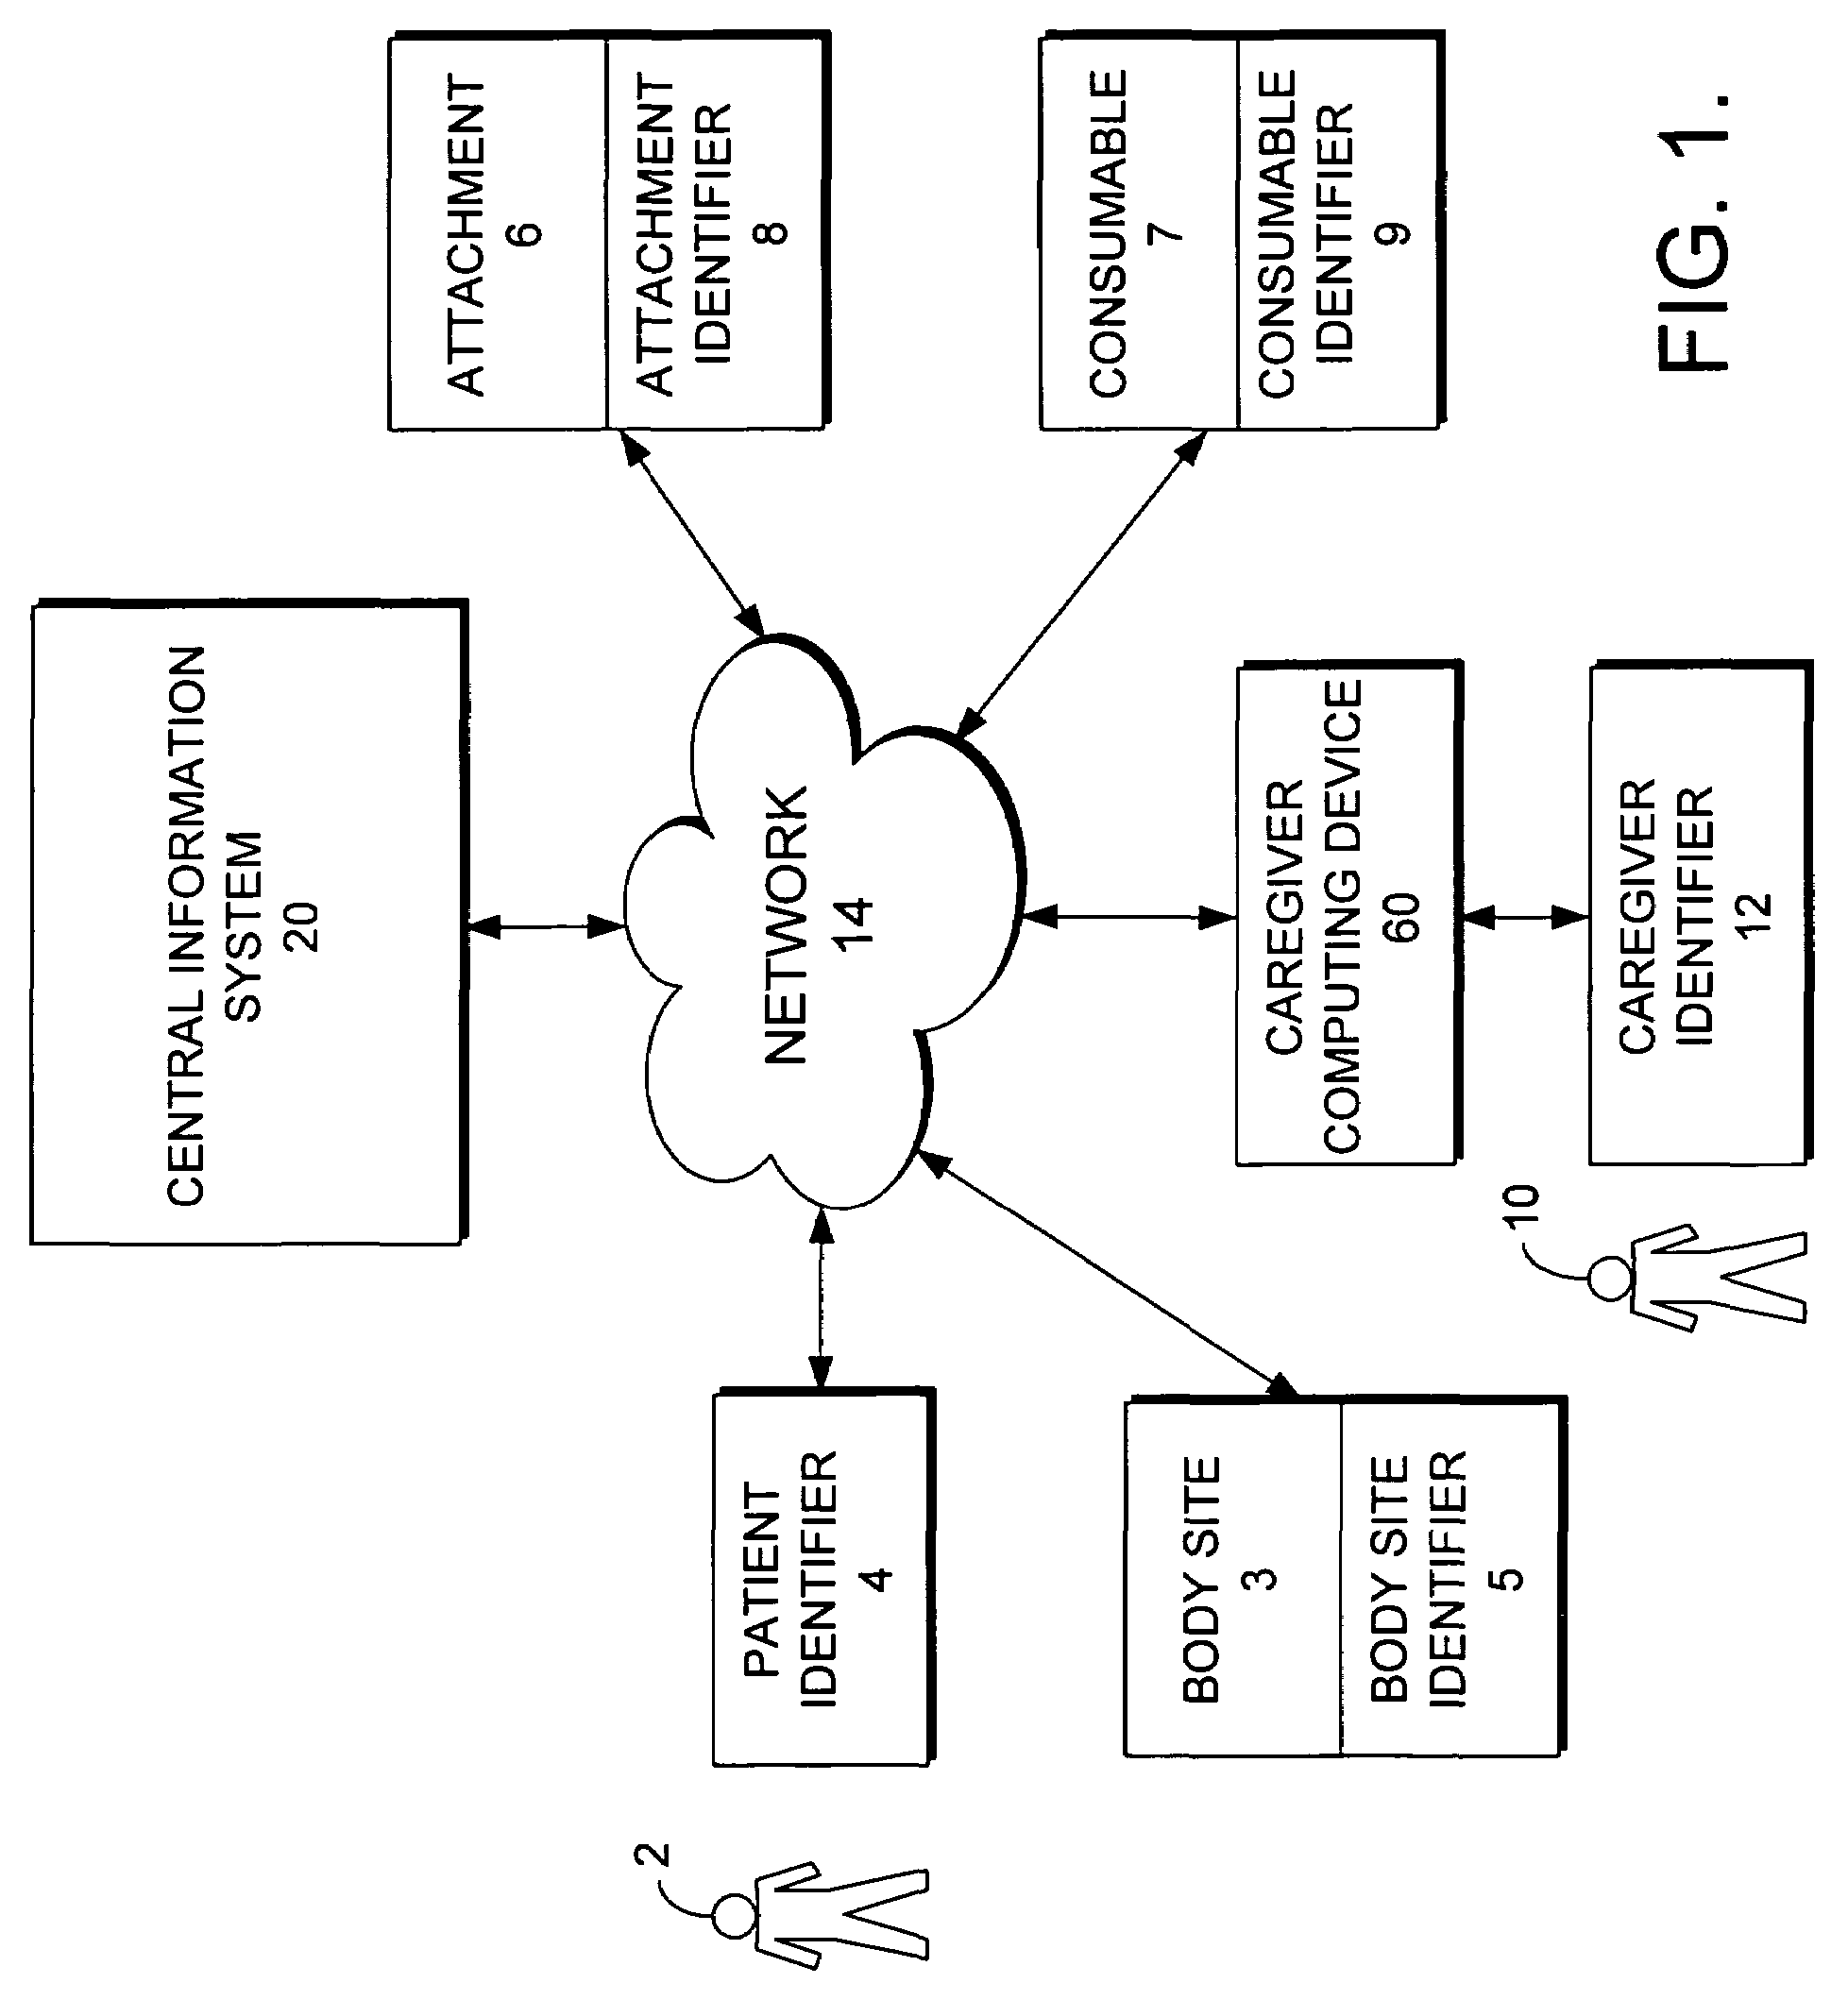 Computerized system and method for determining whether a consumable may be safely administered to a body site of a patient